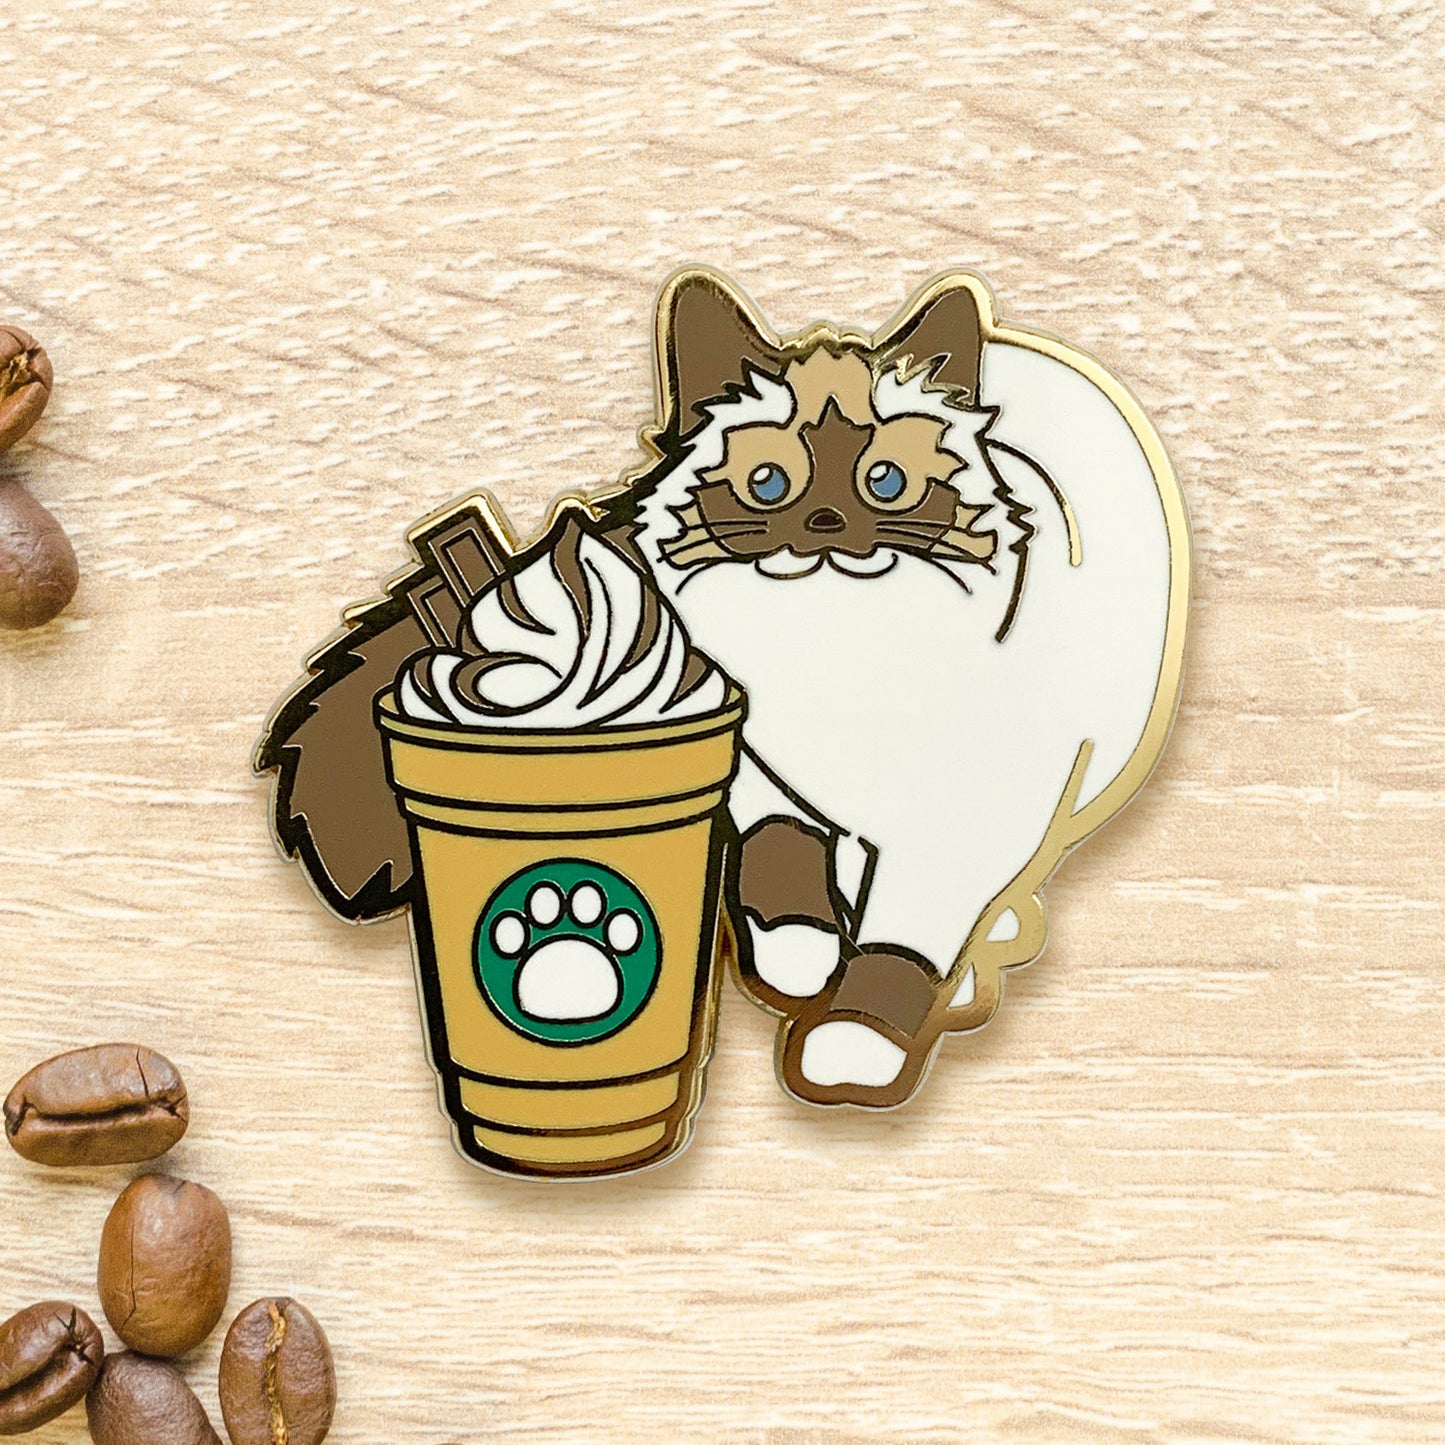 Balinese Cat & Mocha Frappe Coffee Hard Enamel Pin by Cocktail Critters